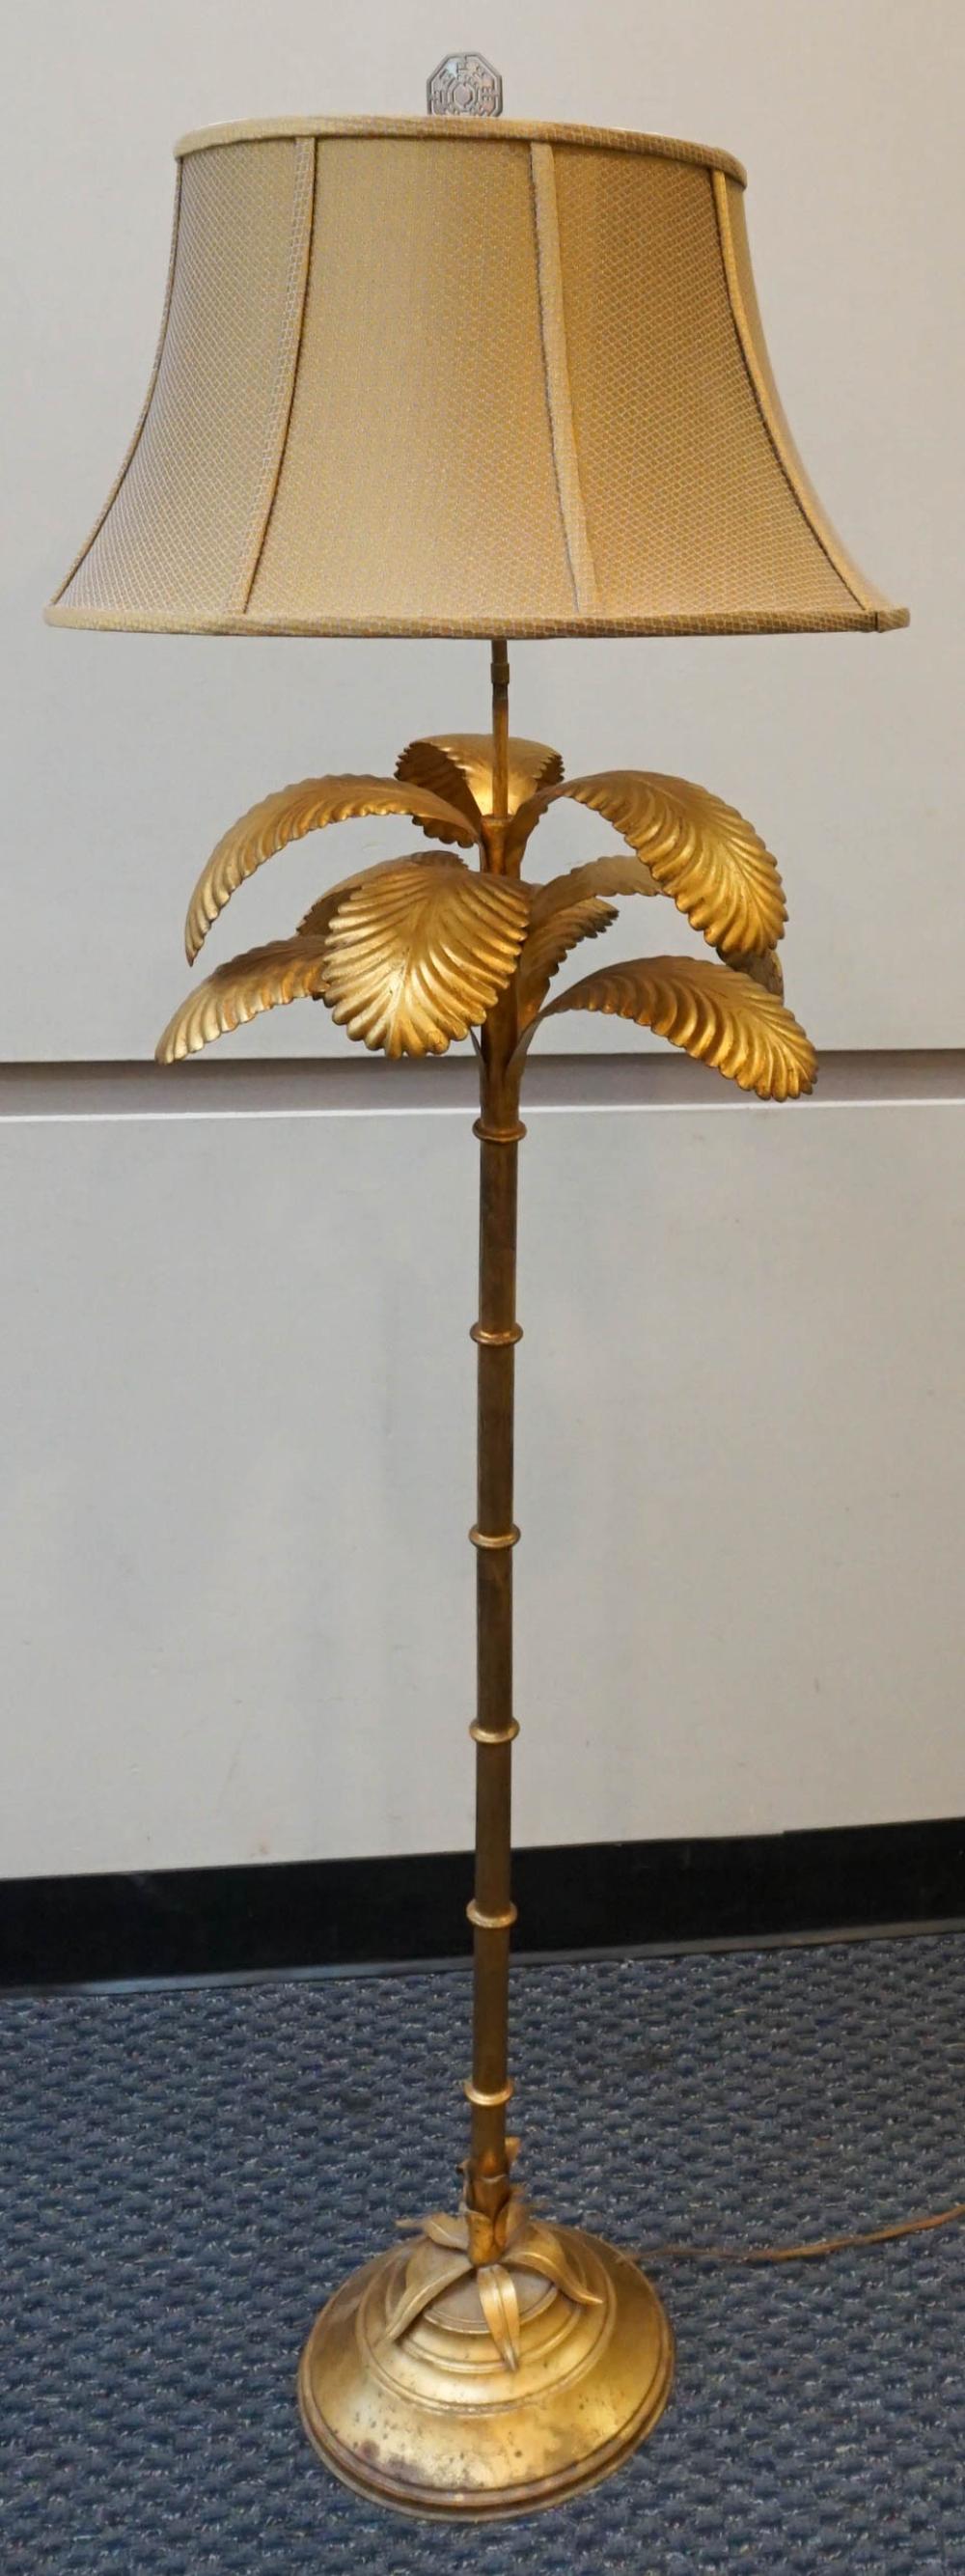 REGENCY STYLE GILT DECORATED METAL